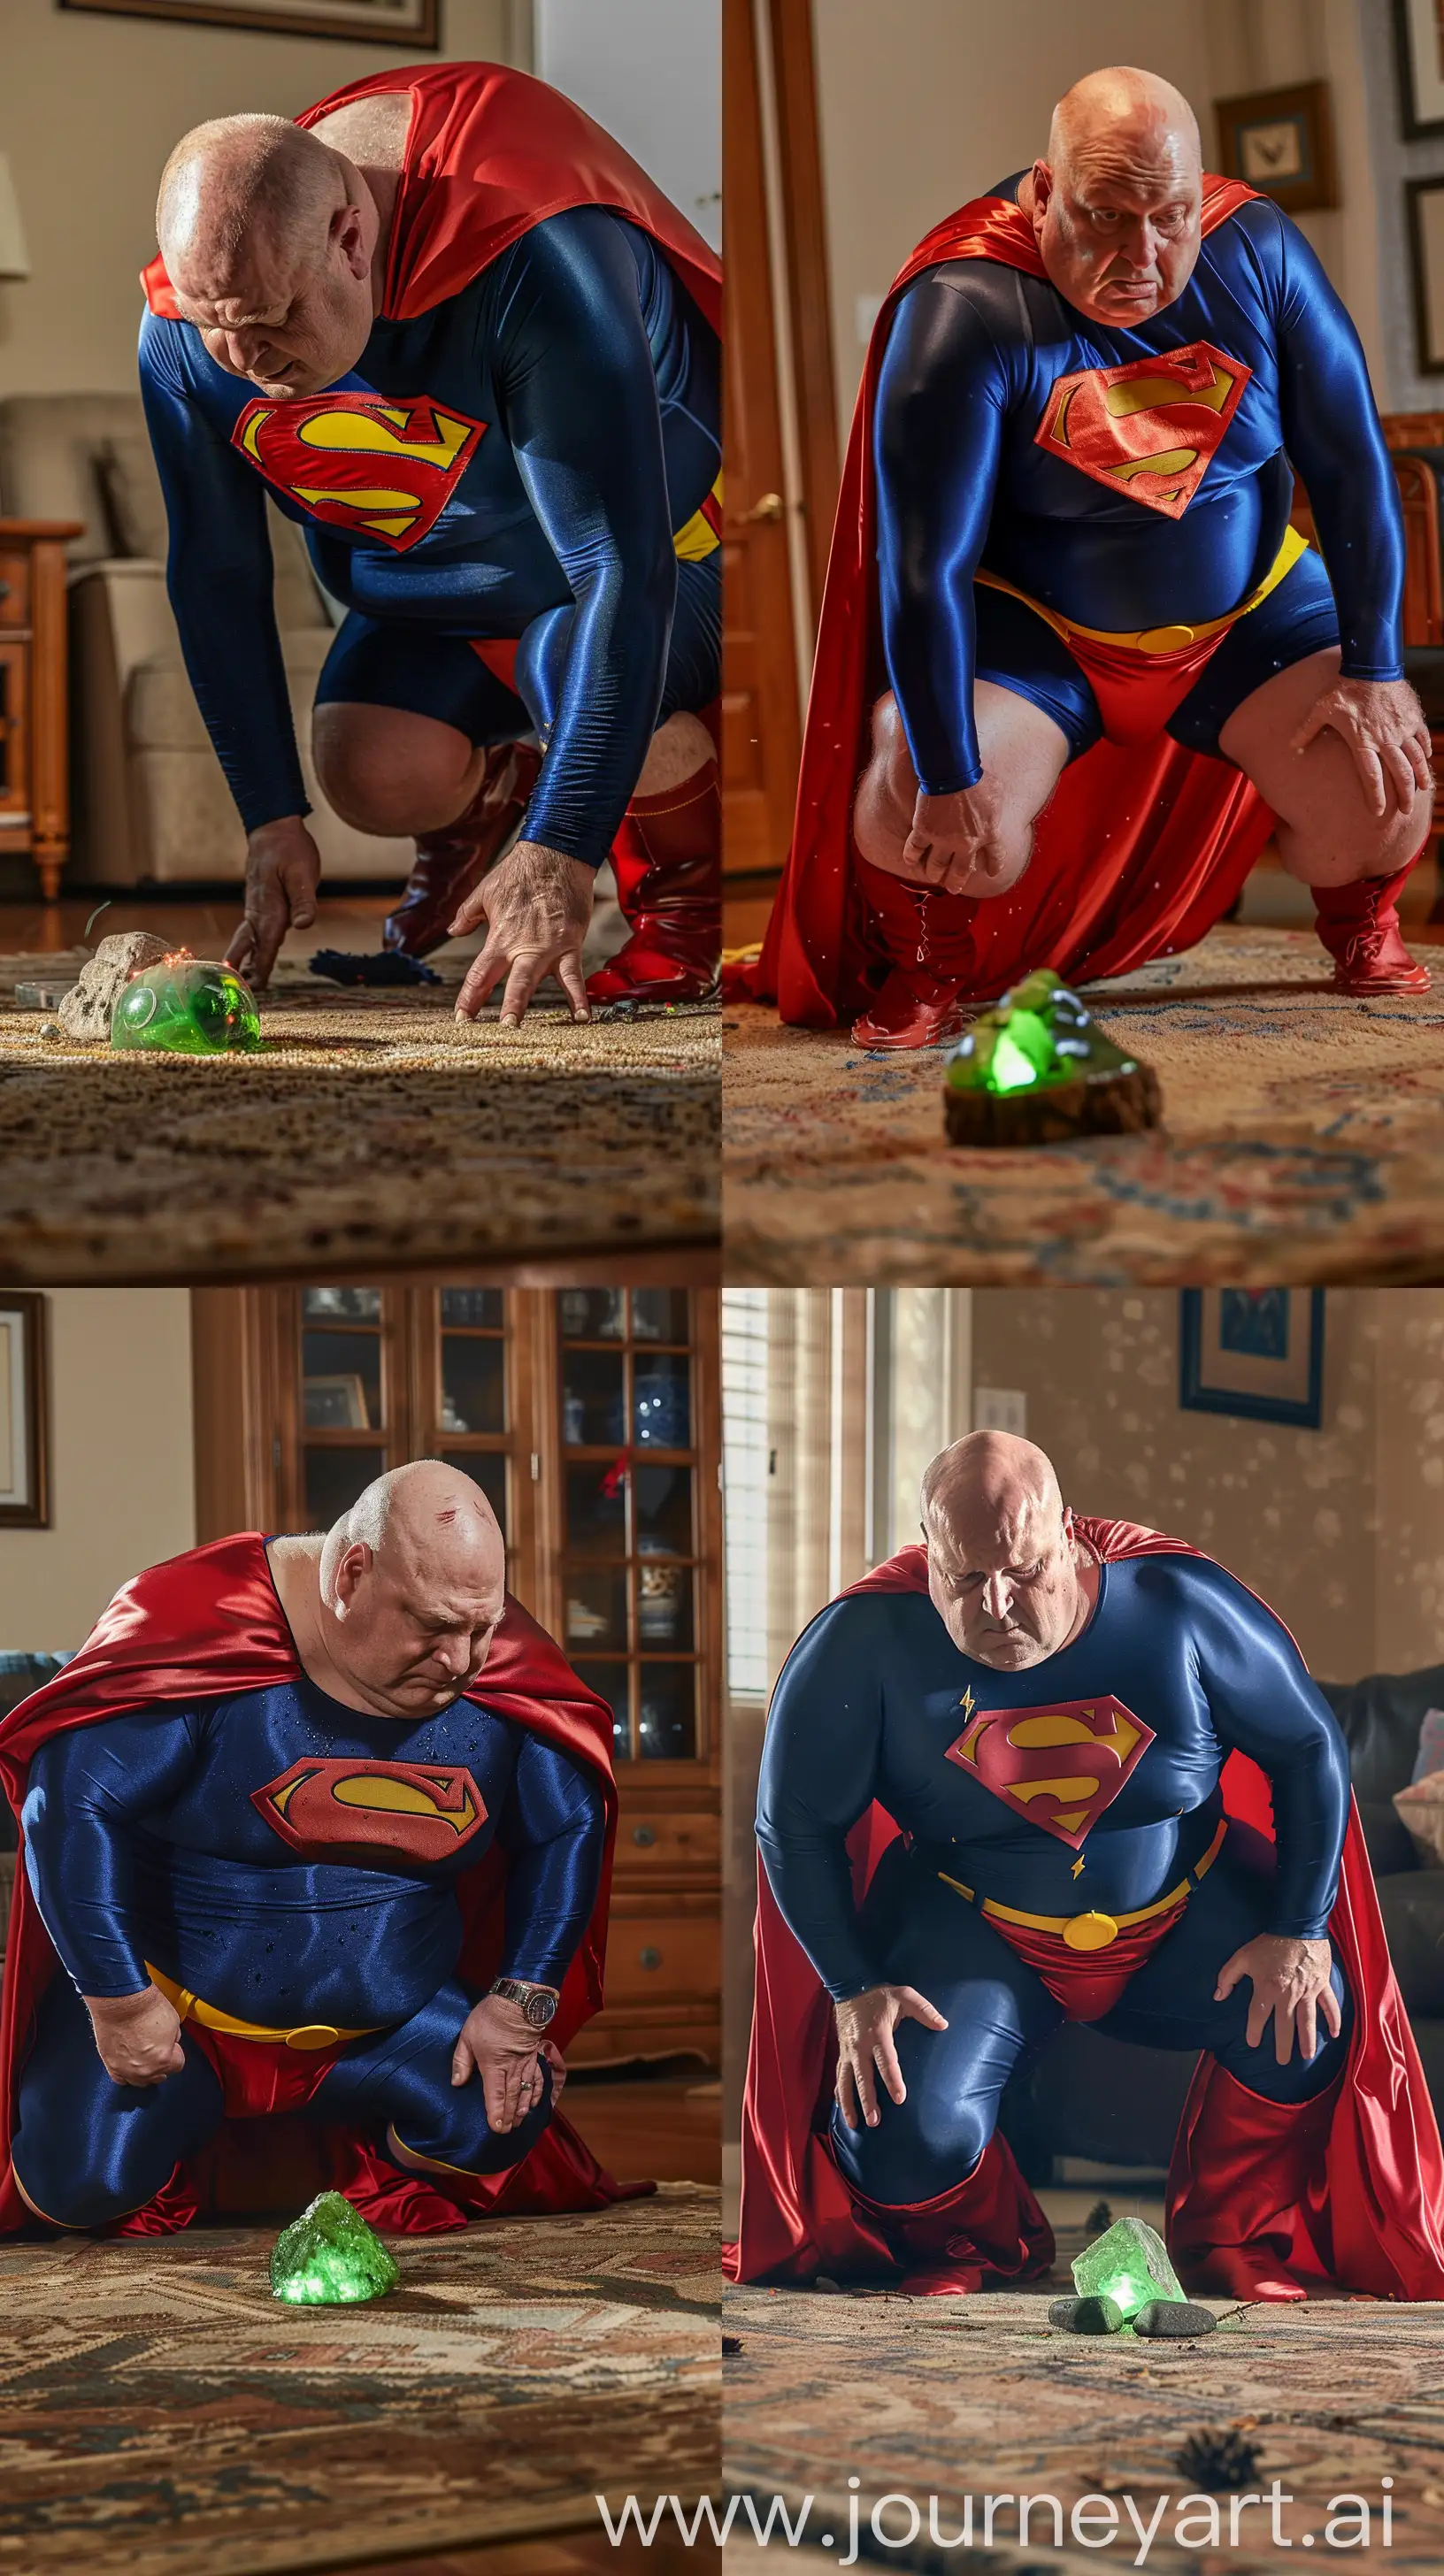 Front close-up photo of an exhausted fat man aged 60 wearing silk navy blue complete superman tight uniform with a large red cape, red trunks, yellow belt, red boots. His face is covered with sweat. Falling on his knees on the ground in front of a small green glowing rock on the ground. Inside a living room. Bald. Clean Shaven. Natural light. --ar 9:16